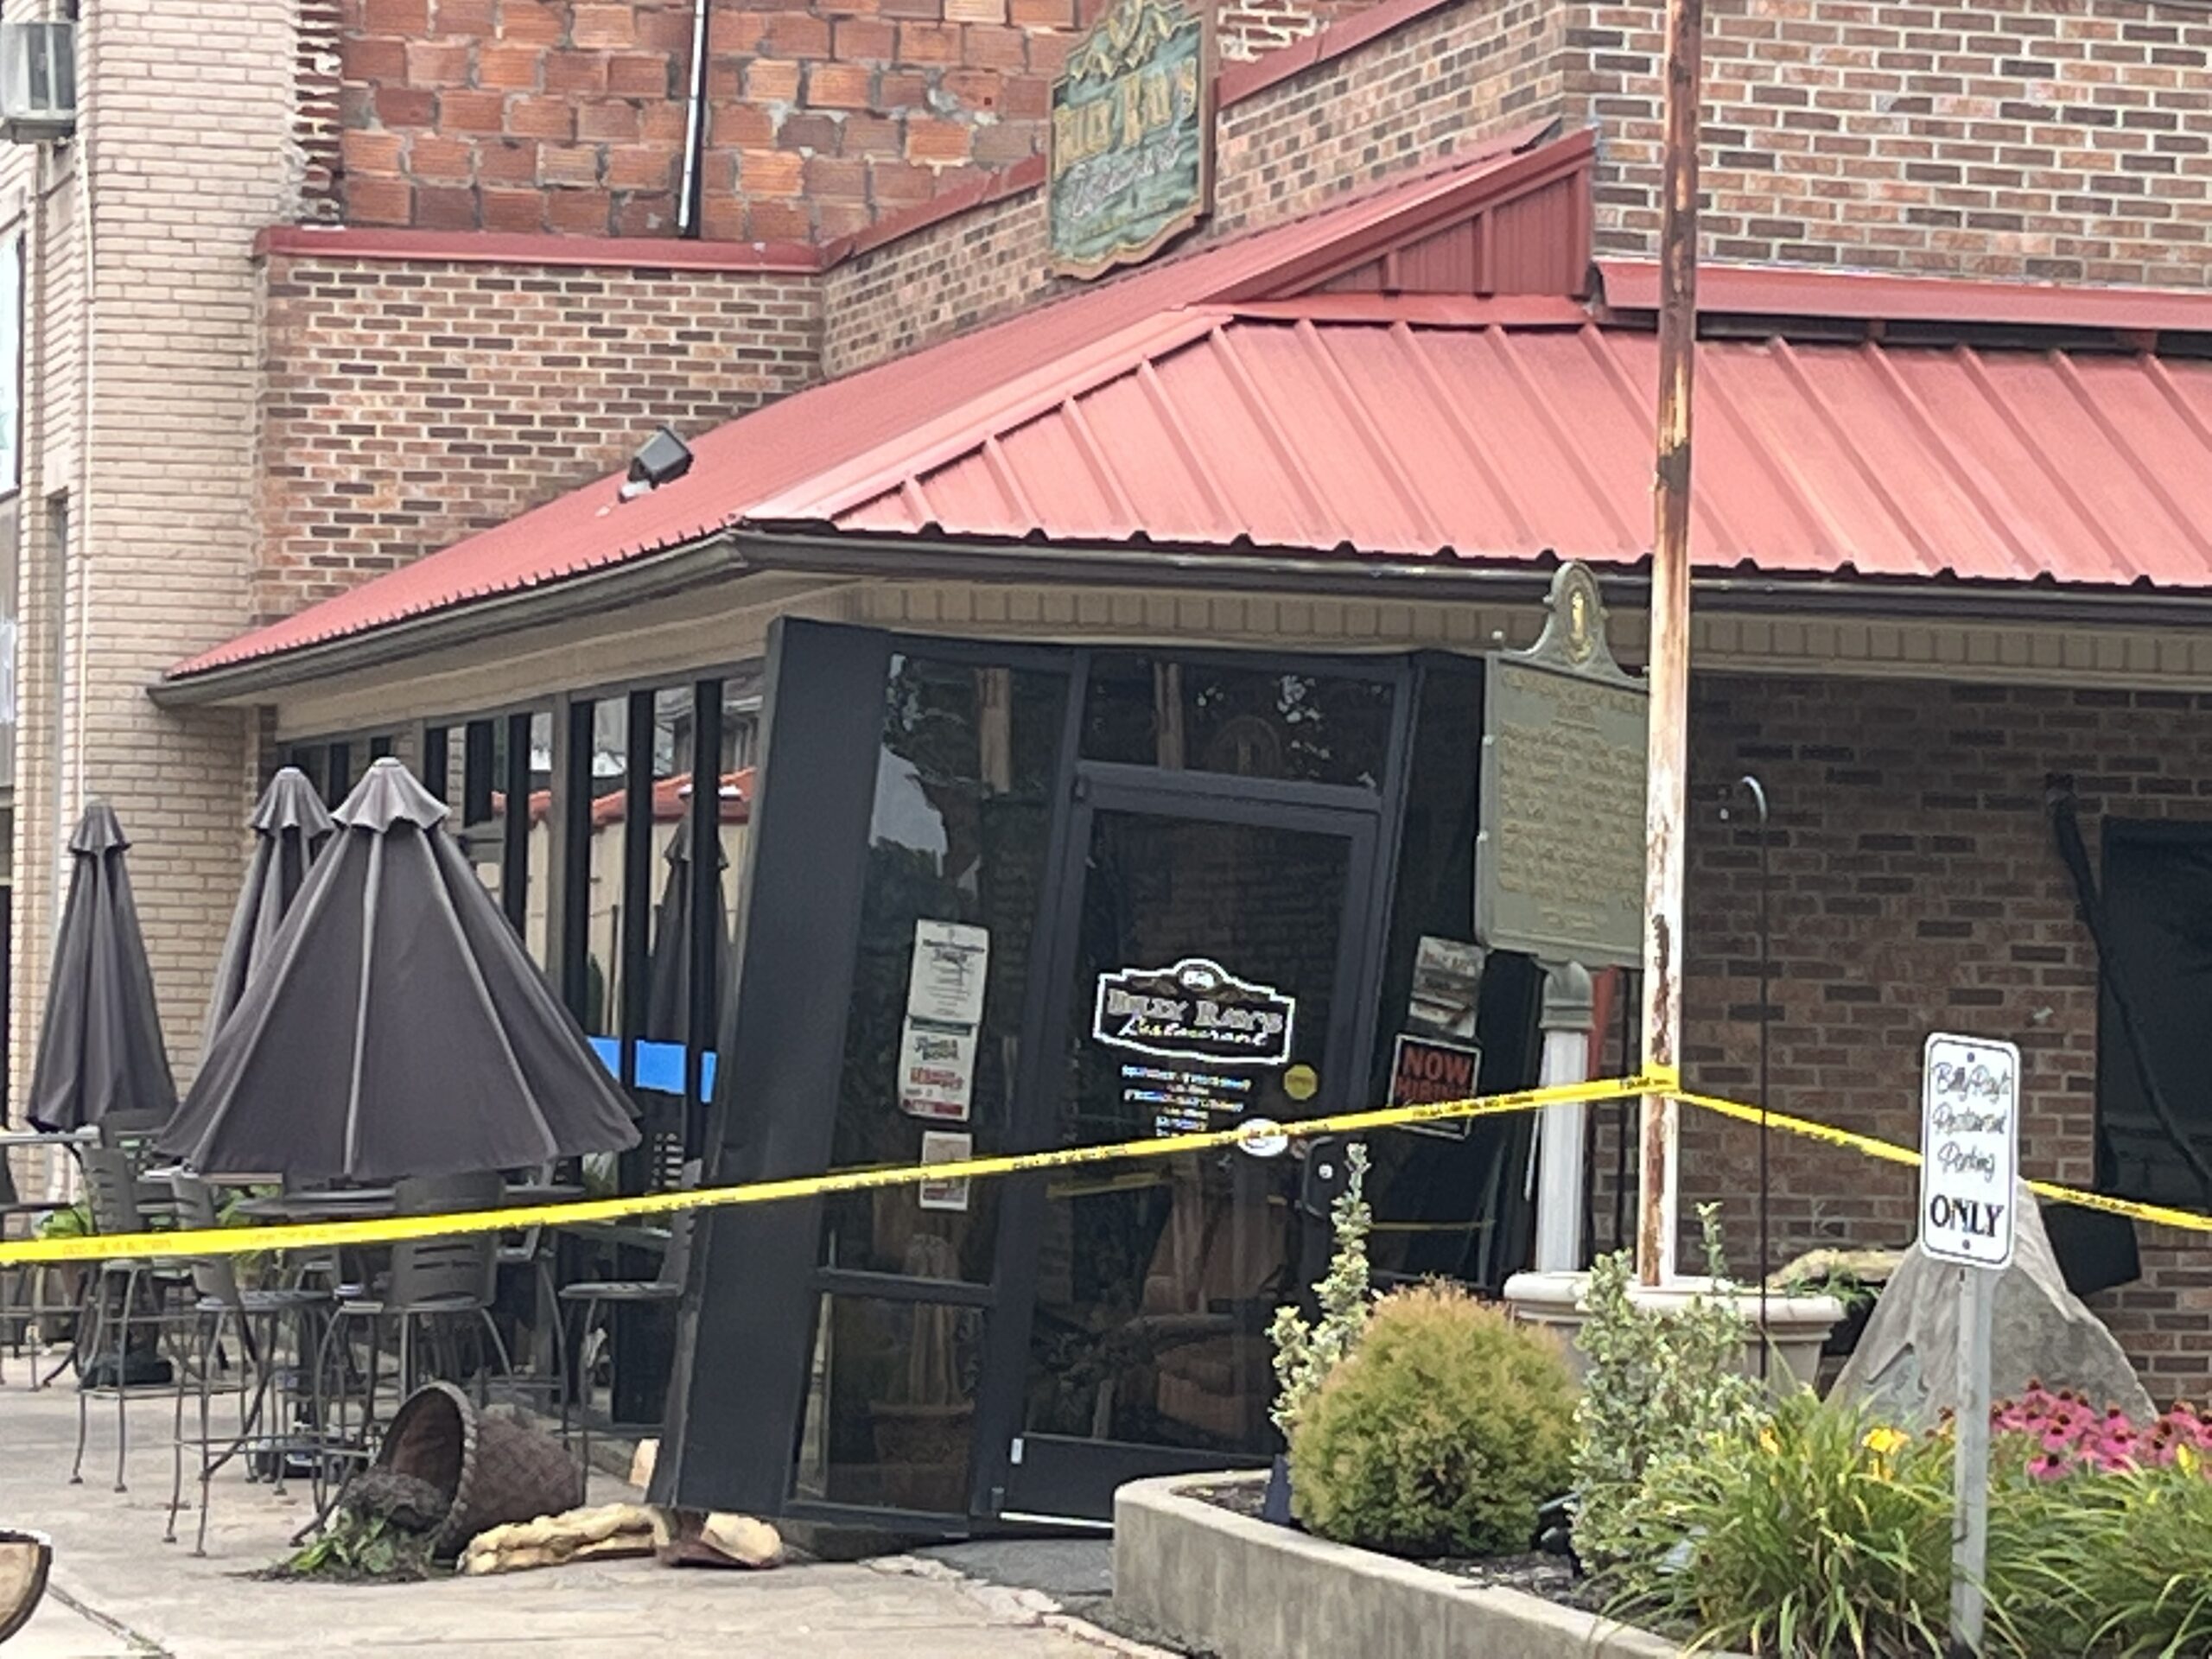 Billy Ray’s closes temporarily after vehicle hits restaurant